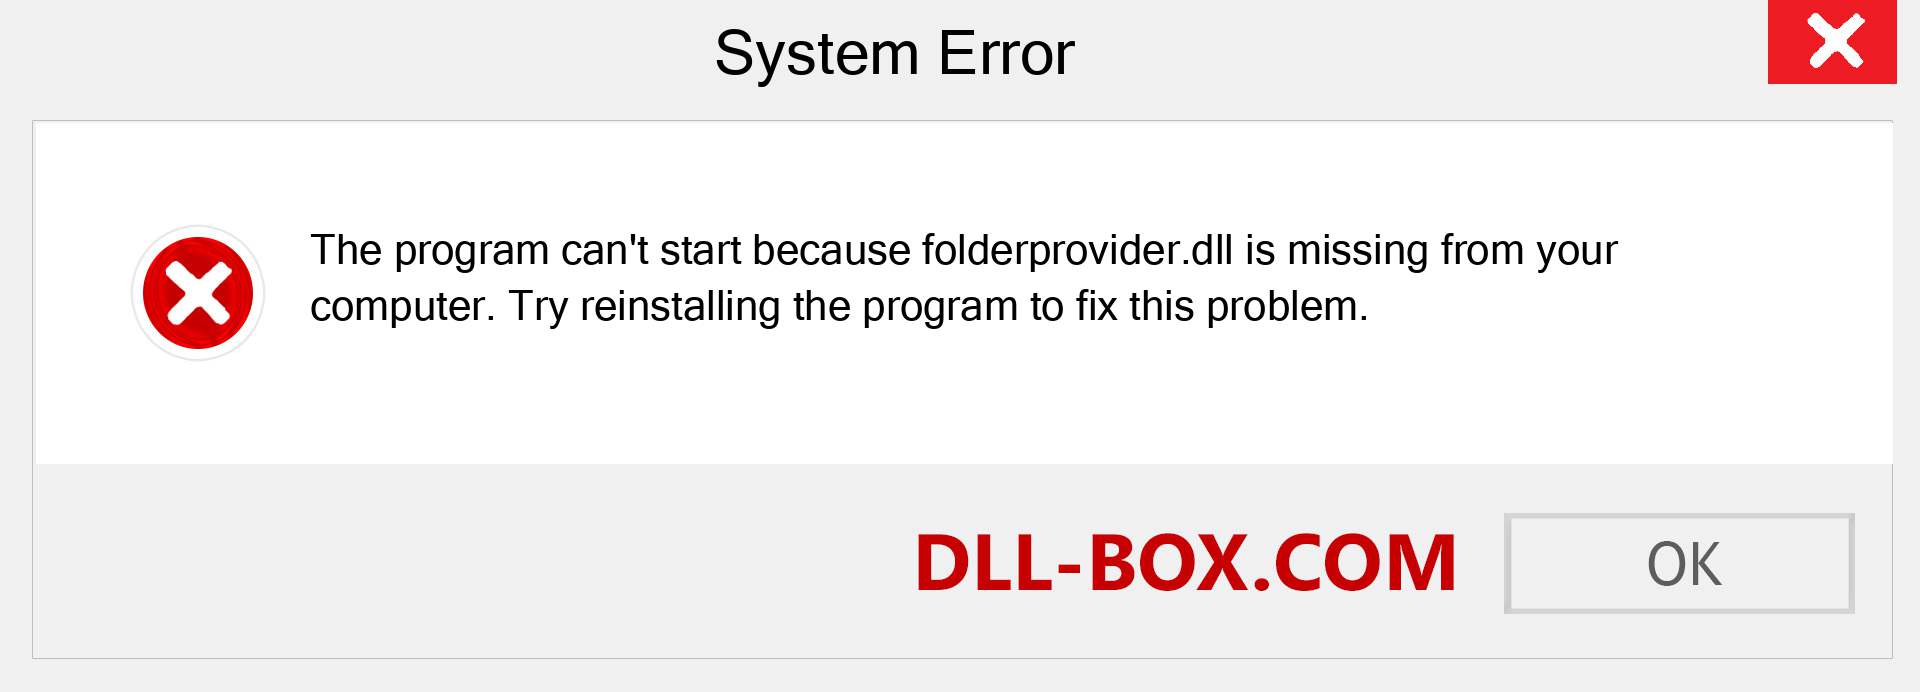  folderprovider.dll file is missing?. Download for Windows 7, 8, 10 - Fix  folderprovider dll Missing Error on Windows, photos, images